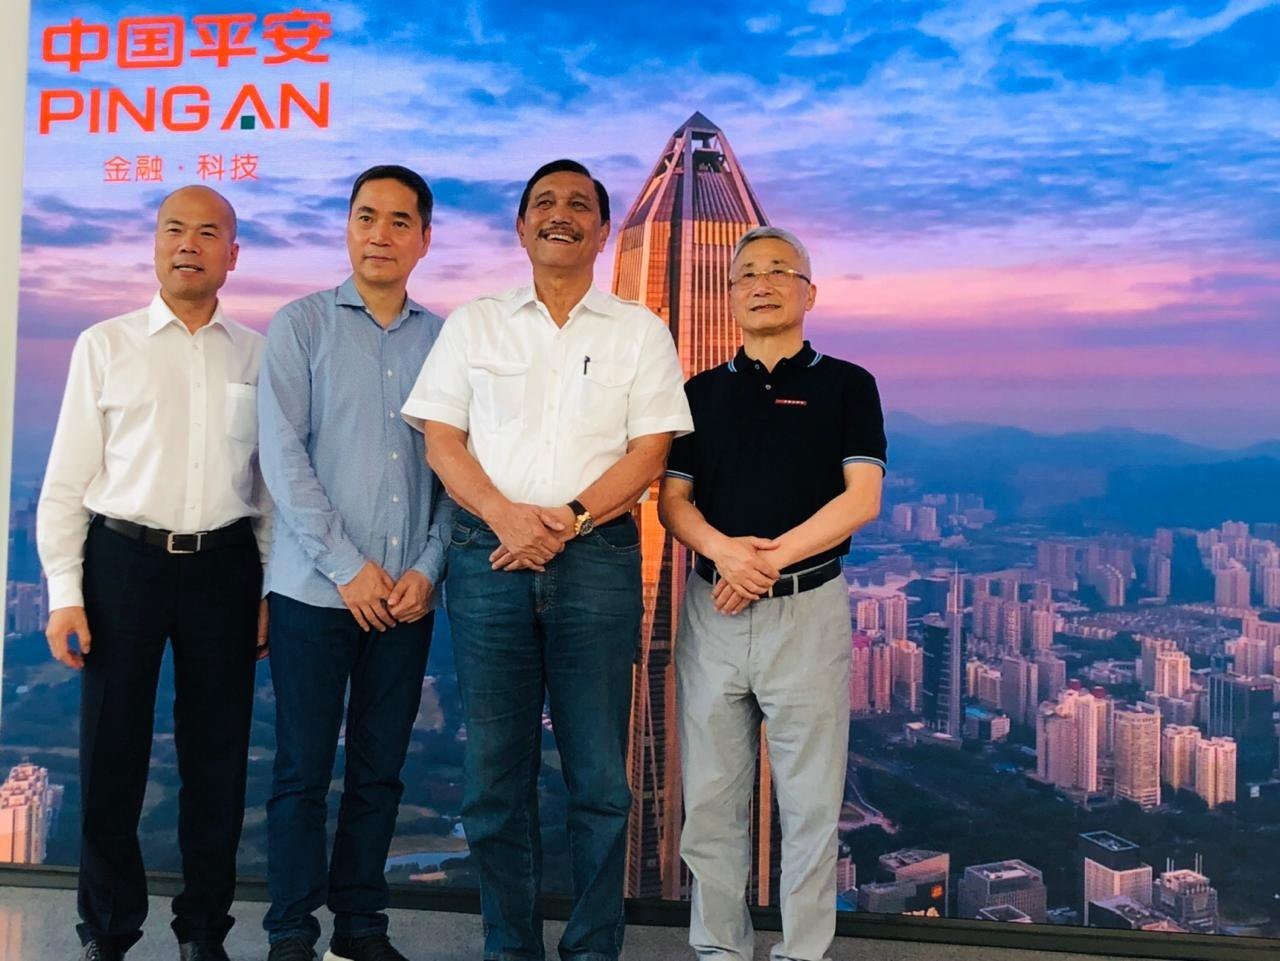 Luhut Binsar Panjaitan (2nd from right) meets with Ping An officials in Shenzhen, China. Photo: Twitter